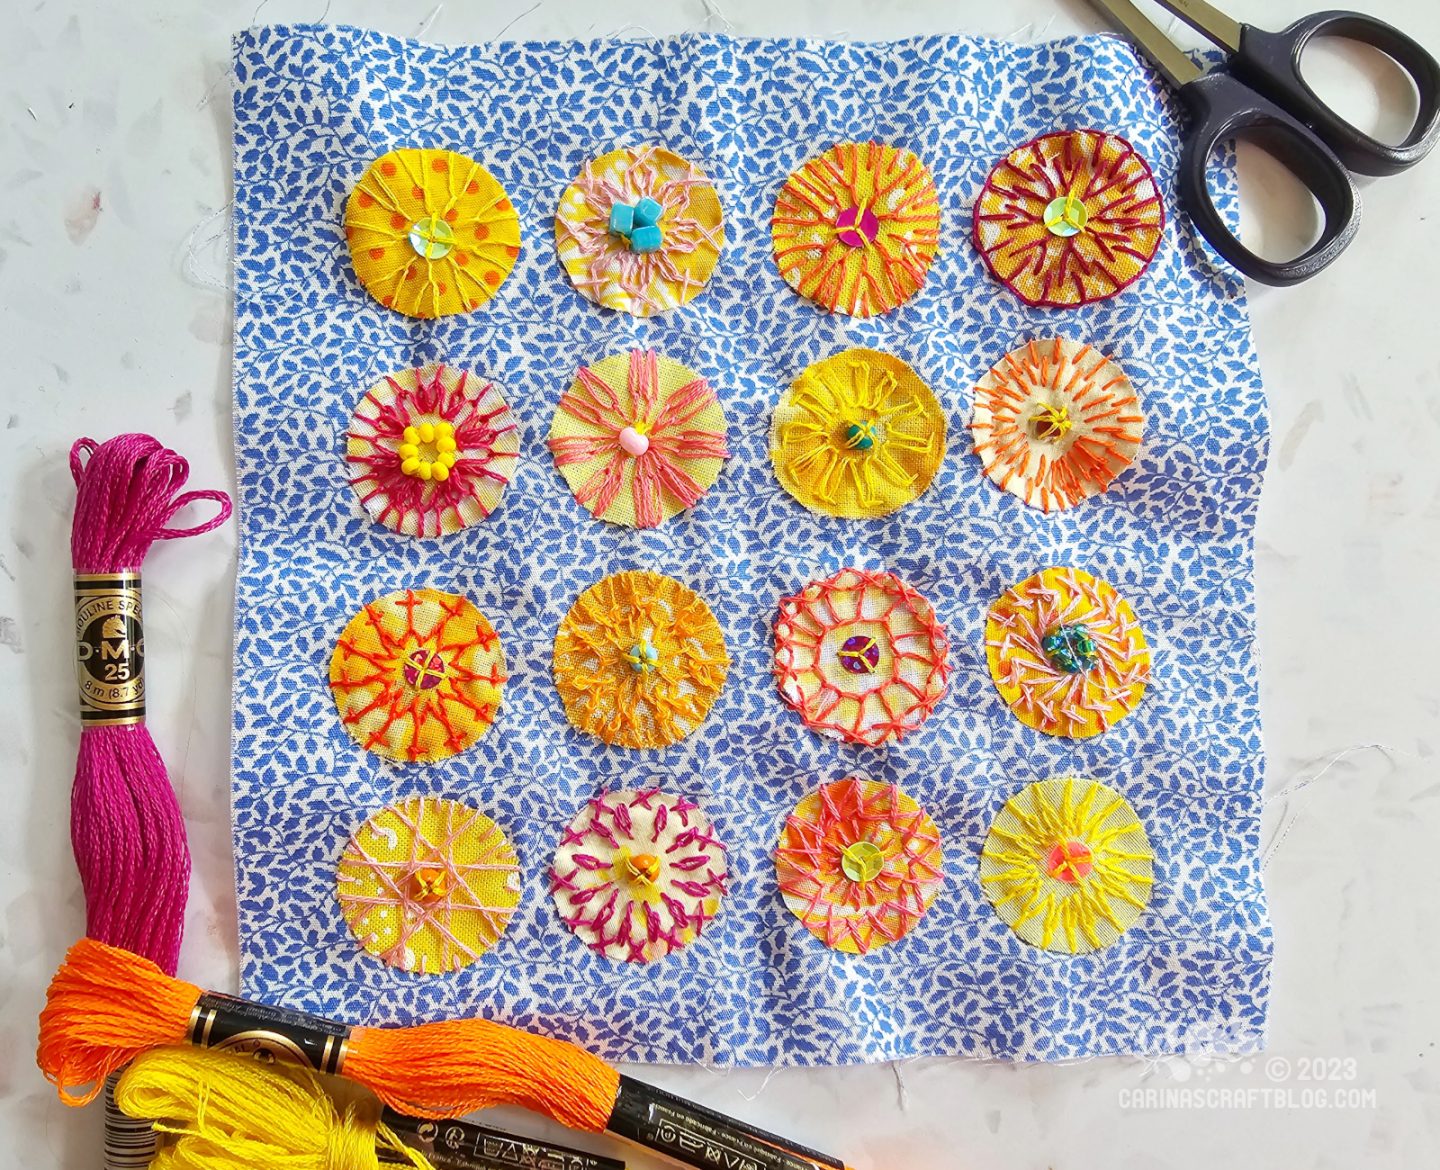 Overhead view of a square of fabric printed with a tiny blue leaf design. 16 yellow or orange fabric circles are appliquéd on the fabric in a 4 by 4 grid. The circles are decorated with various stitches and beads.